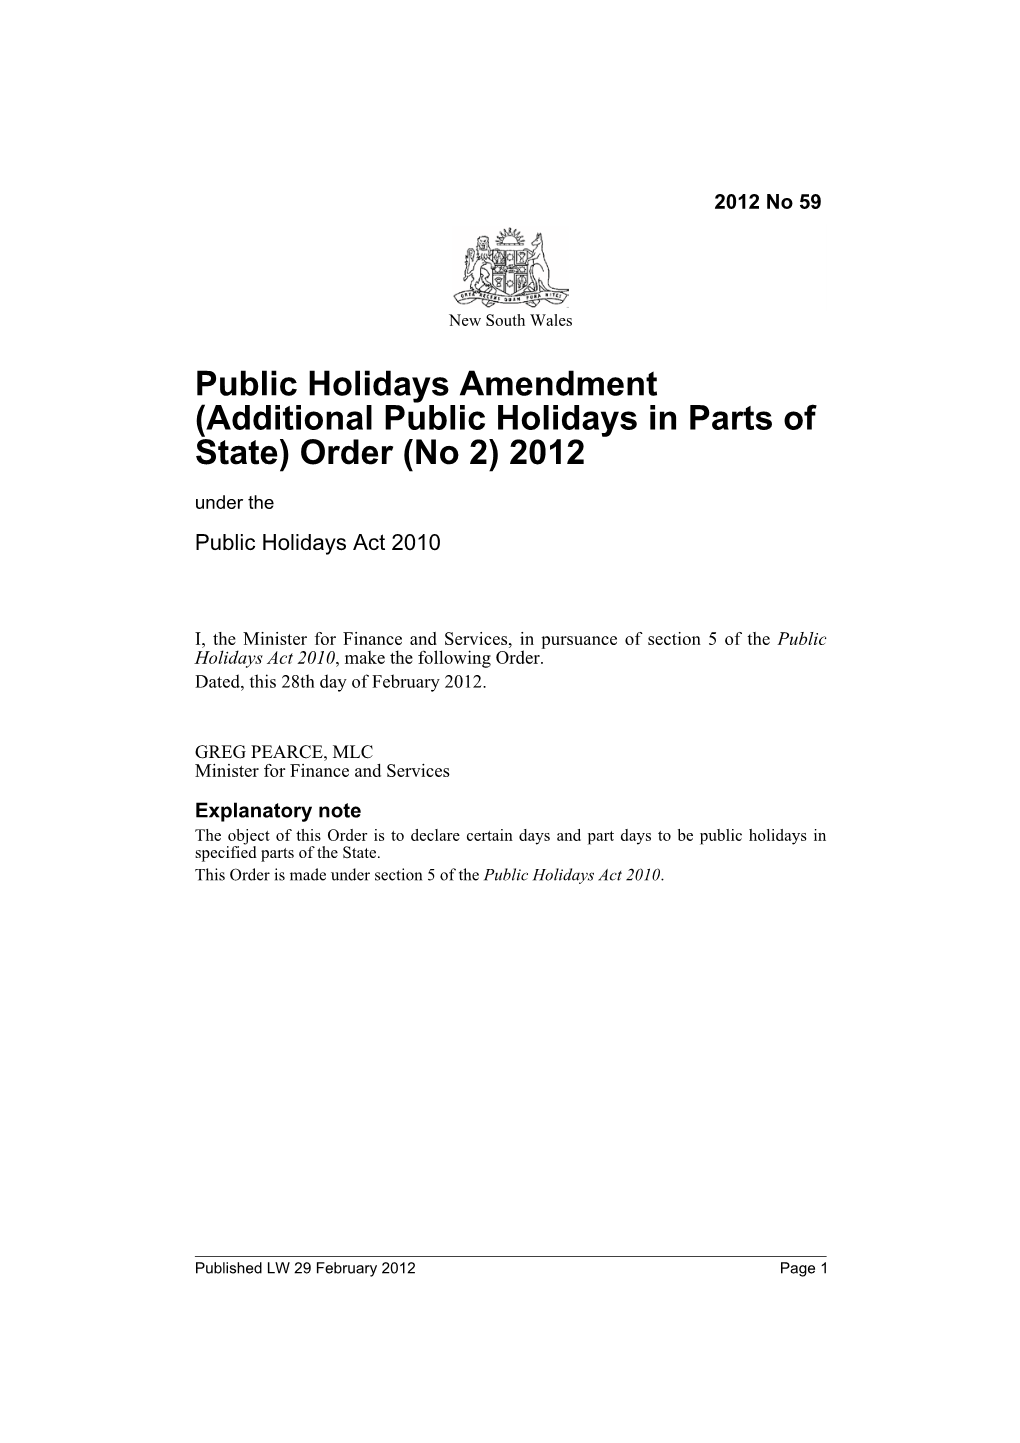 Public Holidays Amendment (Additional Public Holidays in Parts of State) Order (No 2) 2012 Under the Public Holidays Act 2010